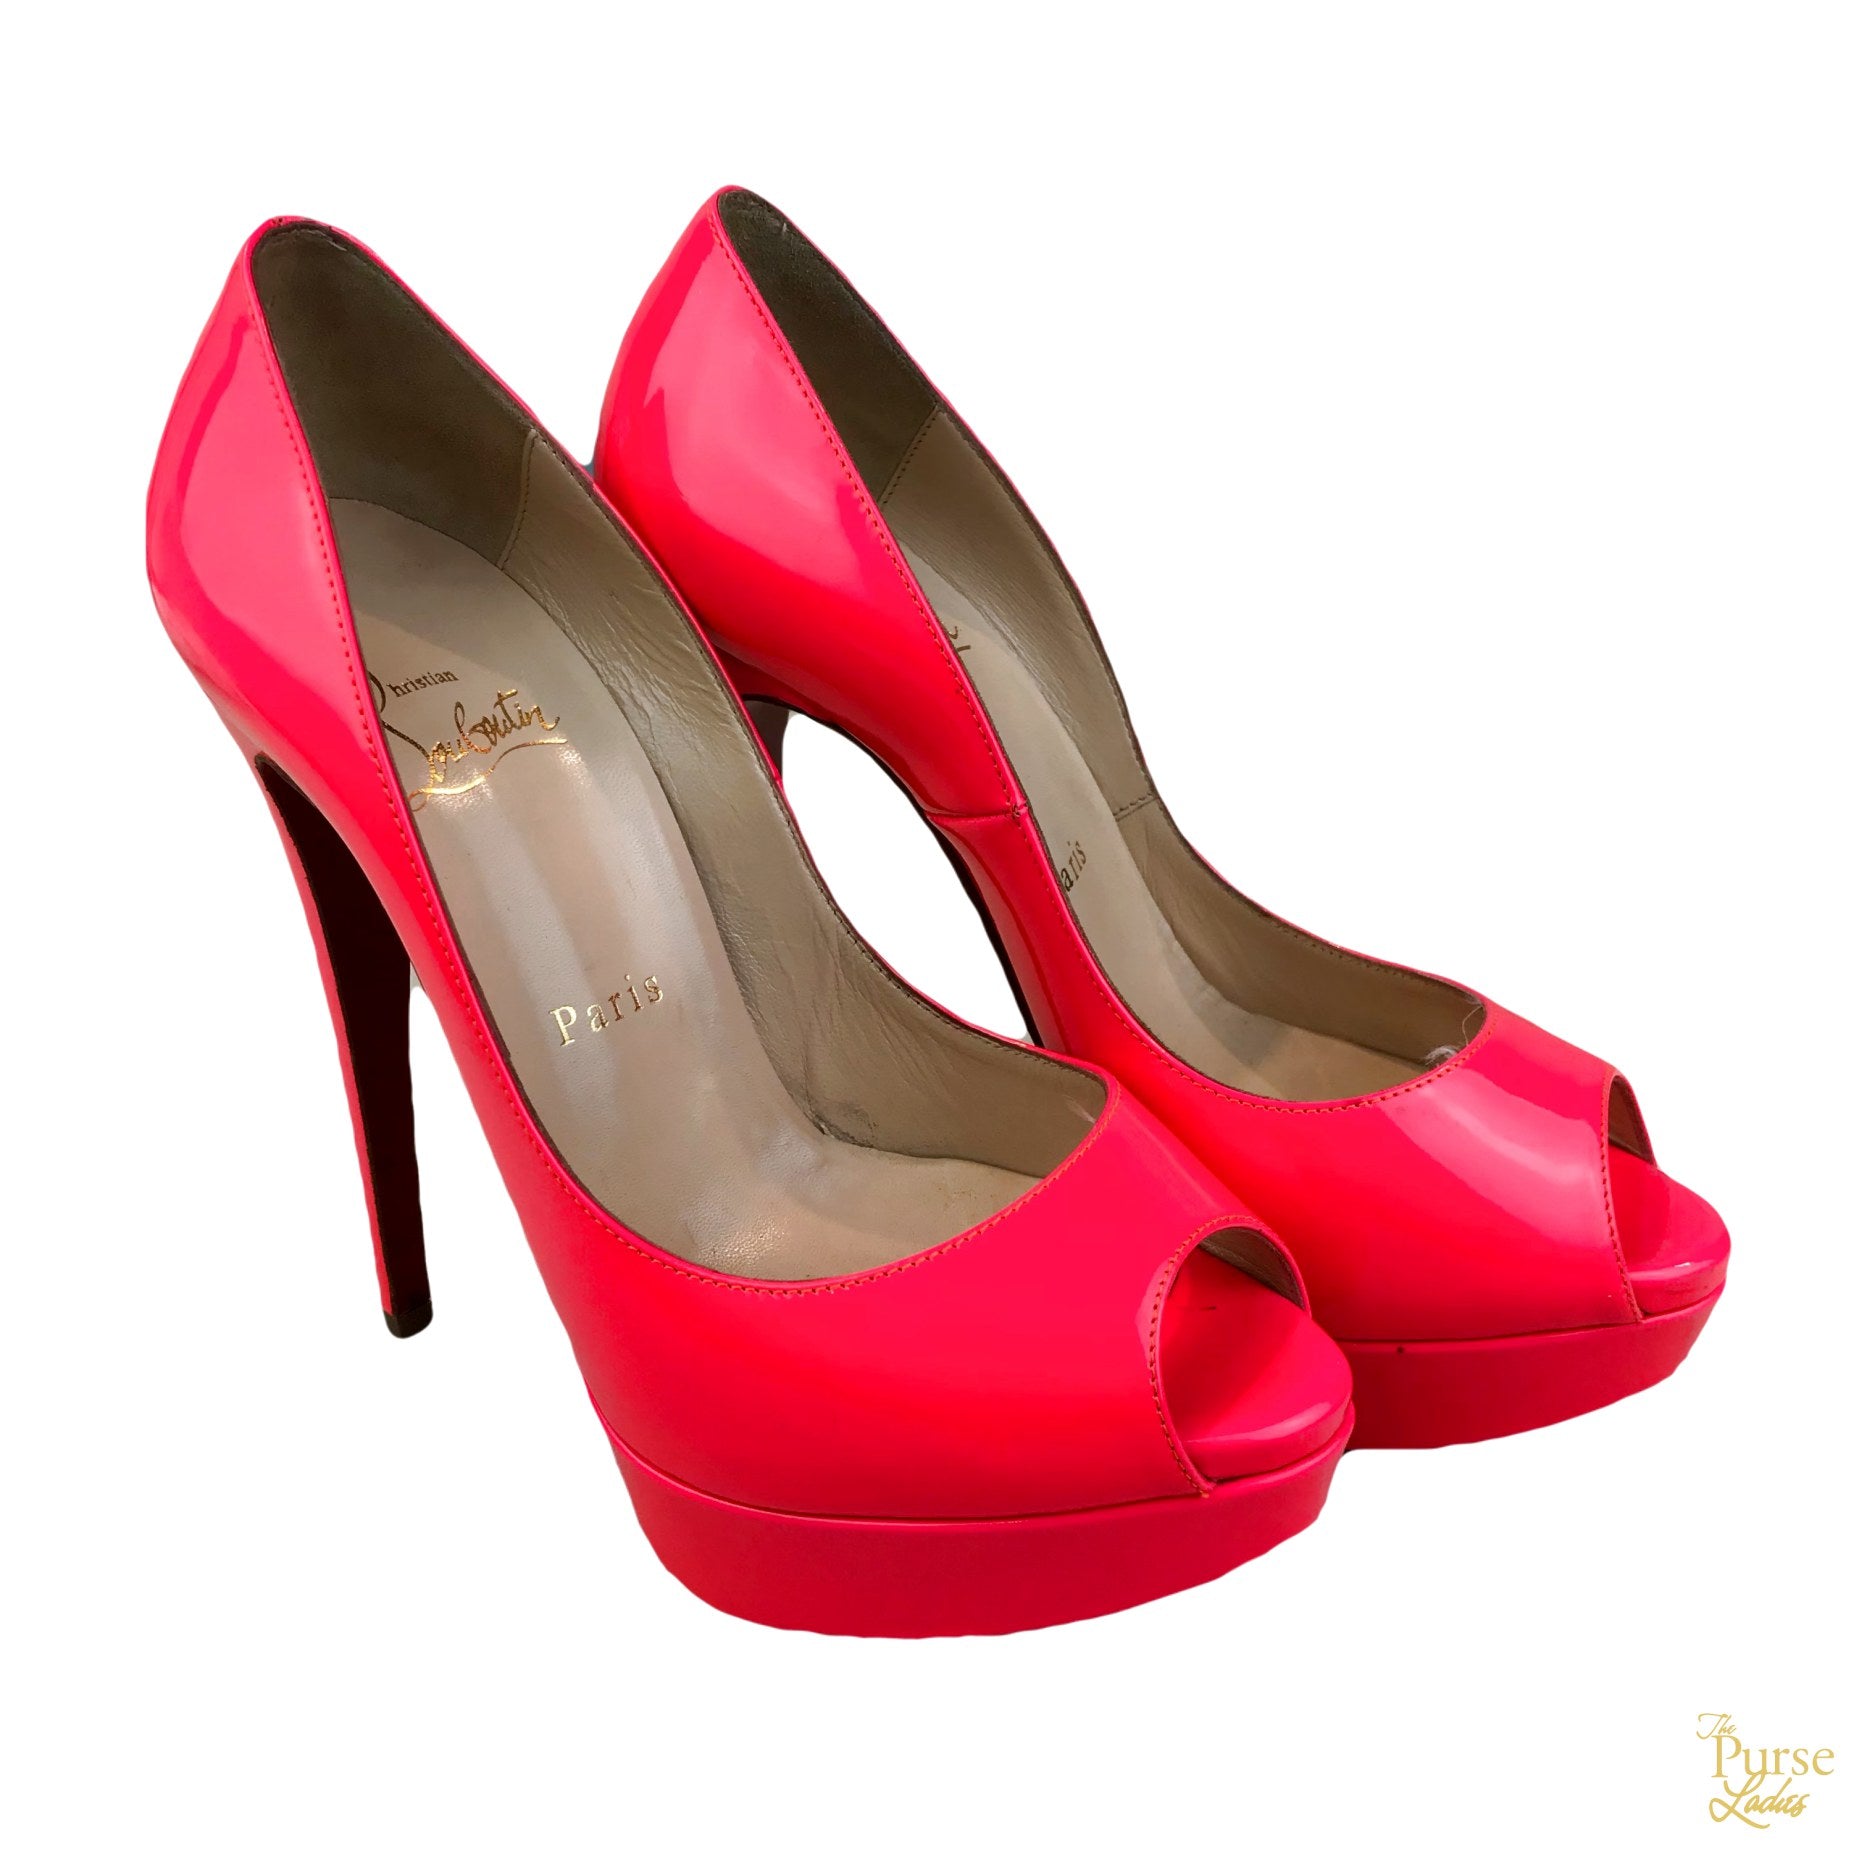 hot pink patent leather pumps